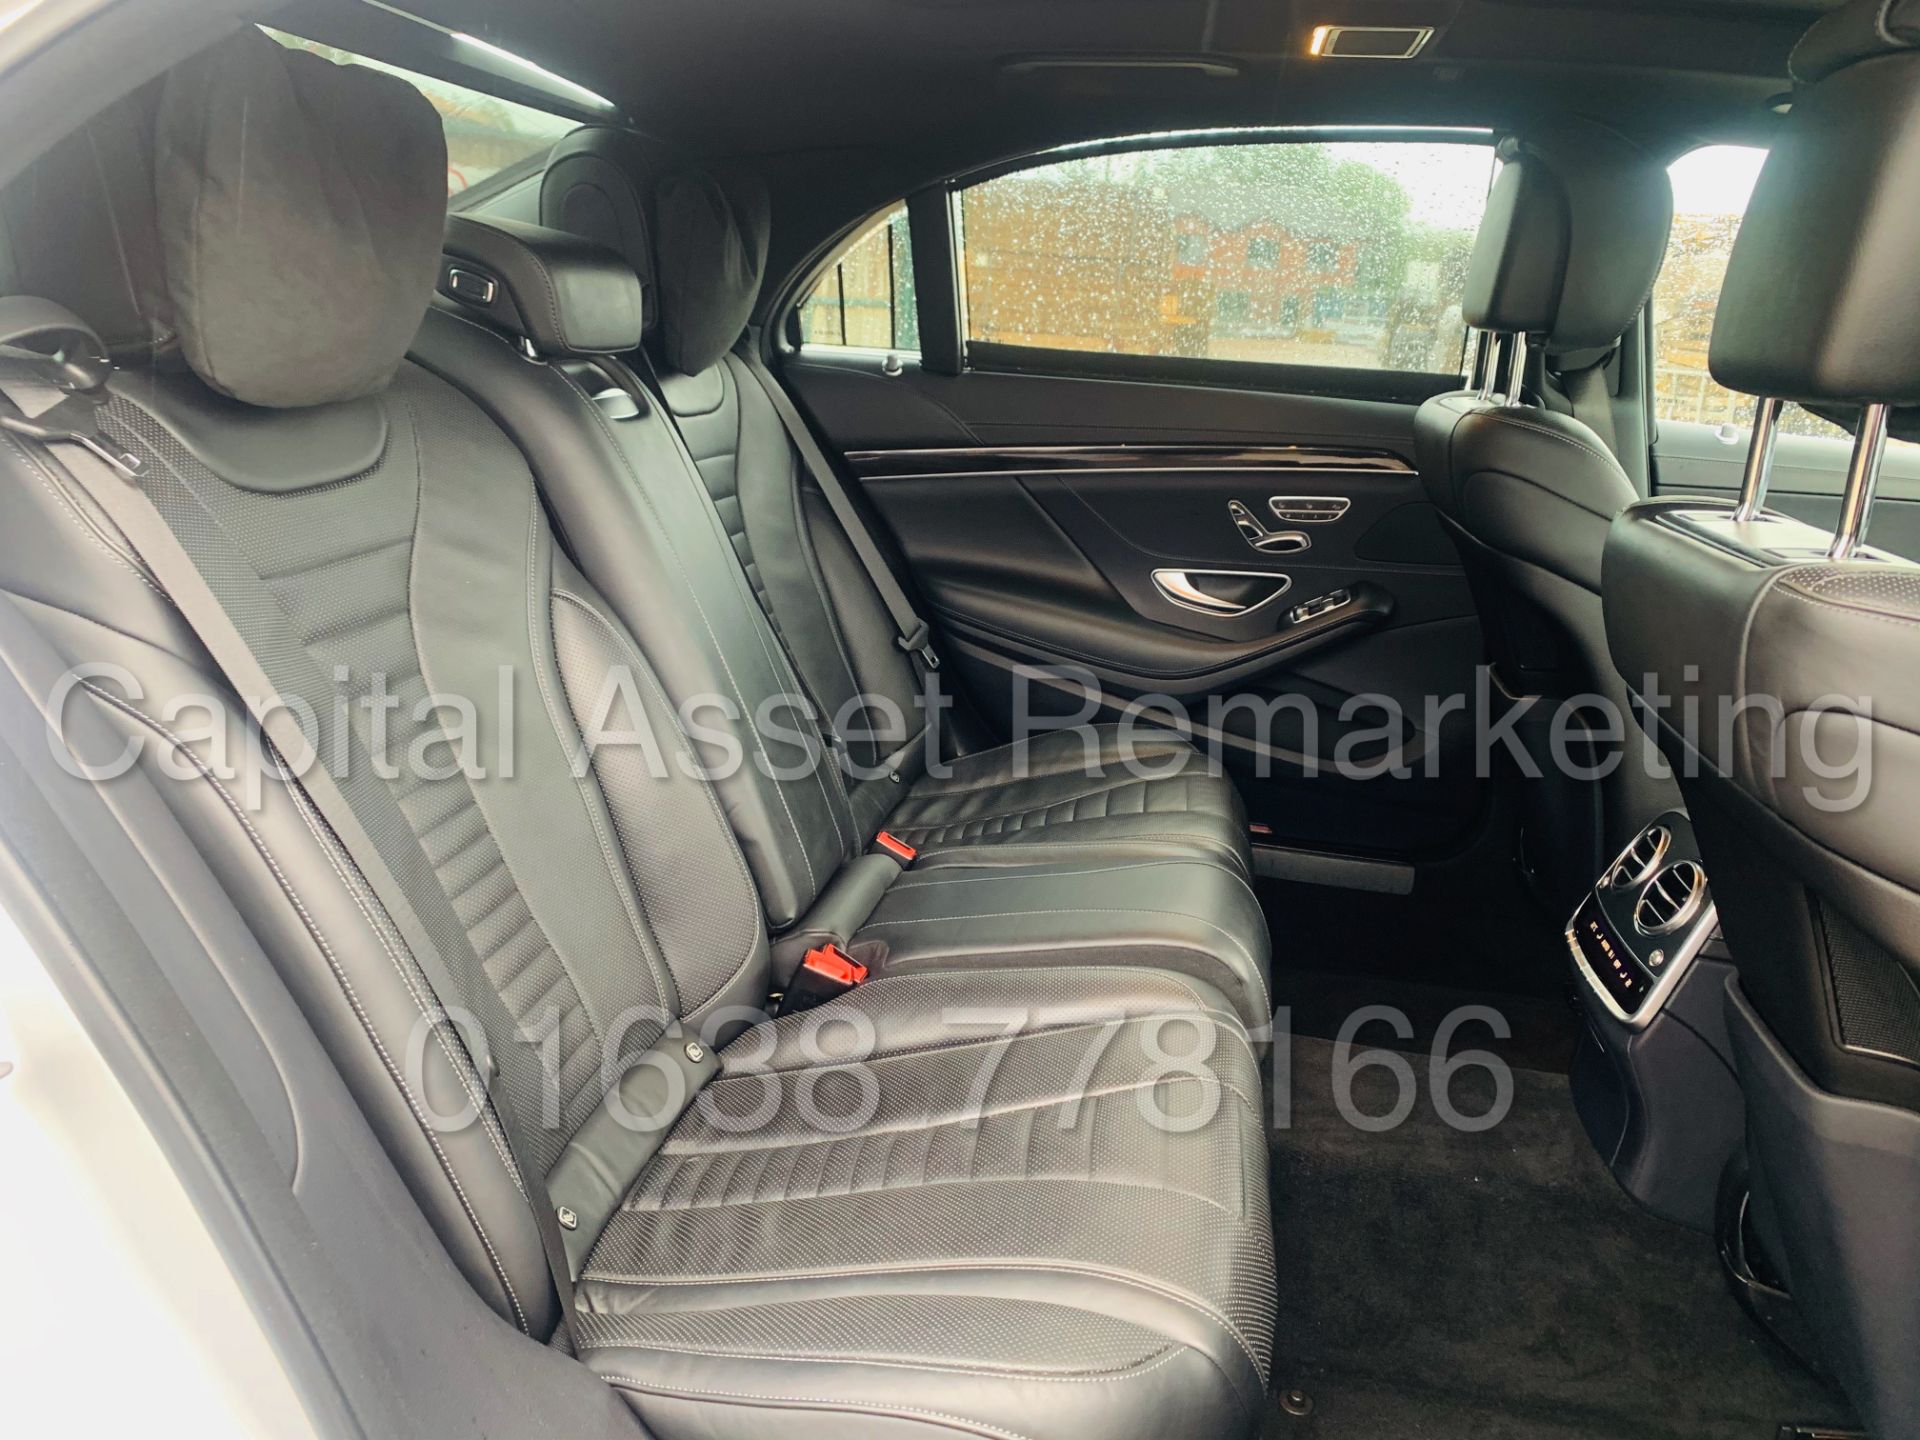 MERCEDES-BENZ S350D LWB *AMG LINE - EXECUTIVE PREMIUM SALOON* (2018) 9-G TRONIC *TOP OF THE RANGE* - Image 41 of 71